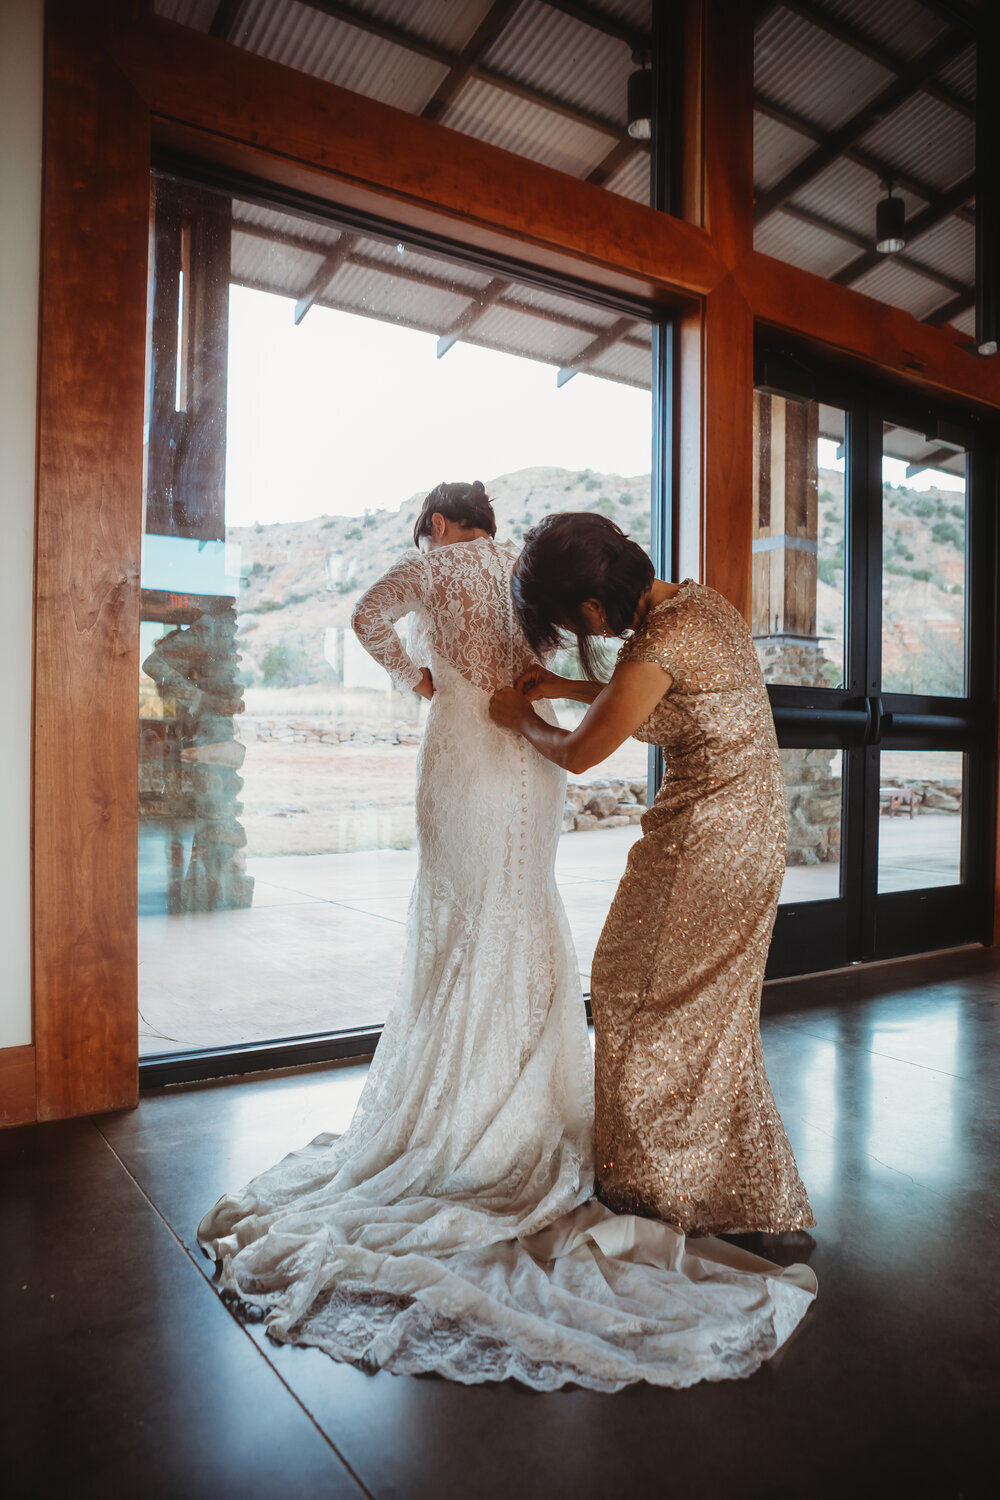  The bride and the maid of honor getting ready for the wedding ceremony #tealawardphotography #texasweddings #amarillophotographer #amarilloweddingphotographer #emotionalphotography #intimateweddingphotography #weddingday #weddingphotos #texasphotographer #inspiredwedding #intimatewedding #weddingformals #bigday #portraits 